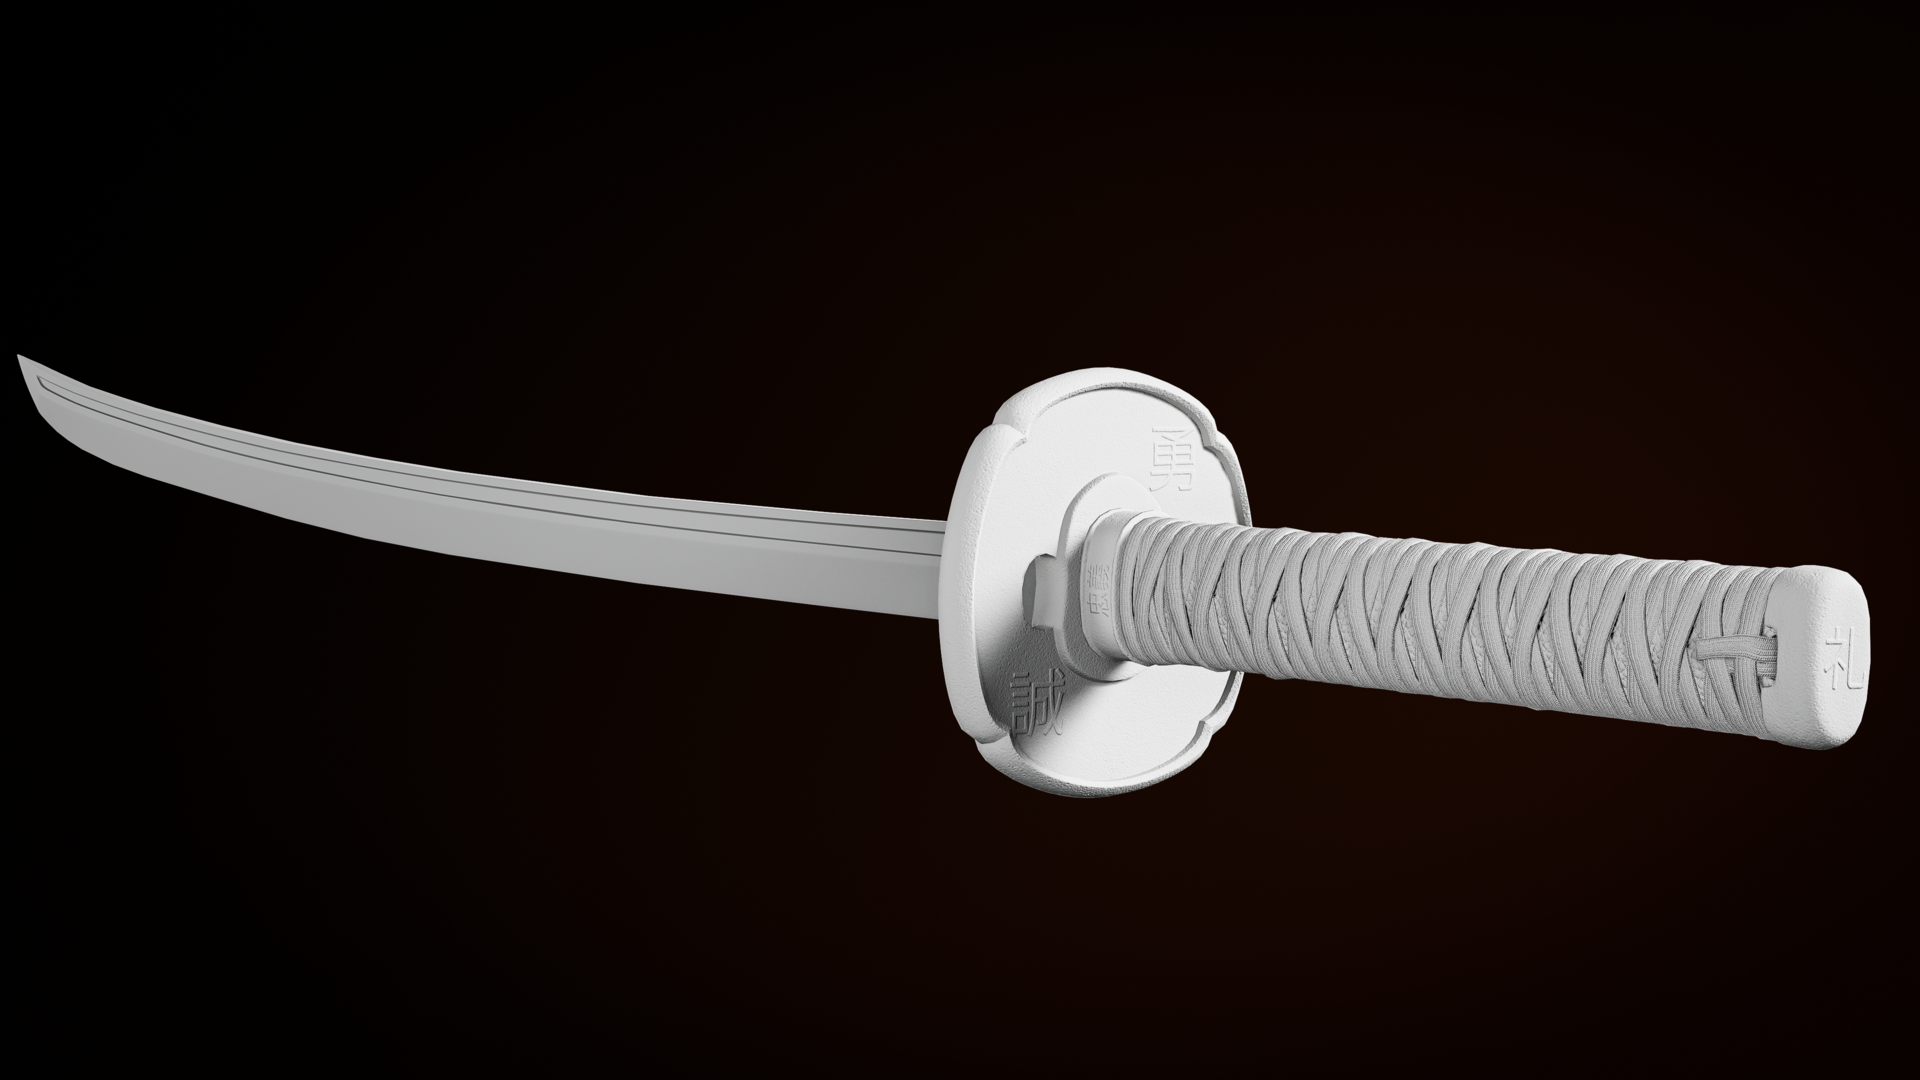 Katana ( Real Time Game ready ) - Finished Projects - Blender Artists  Community